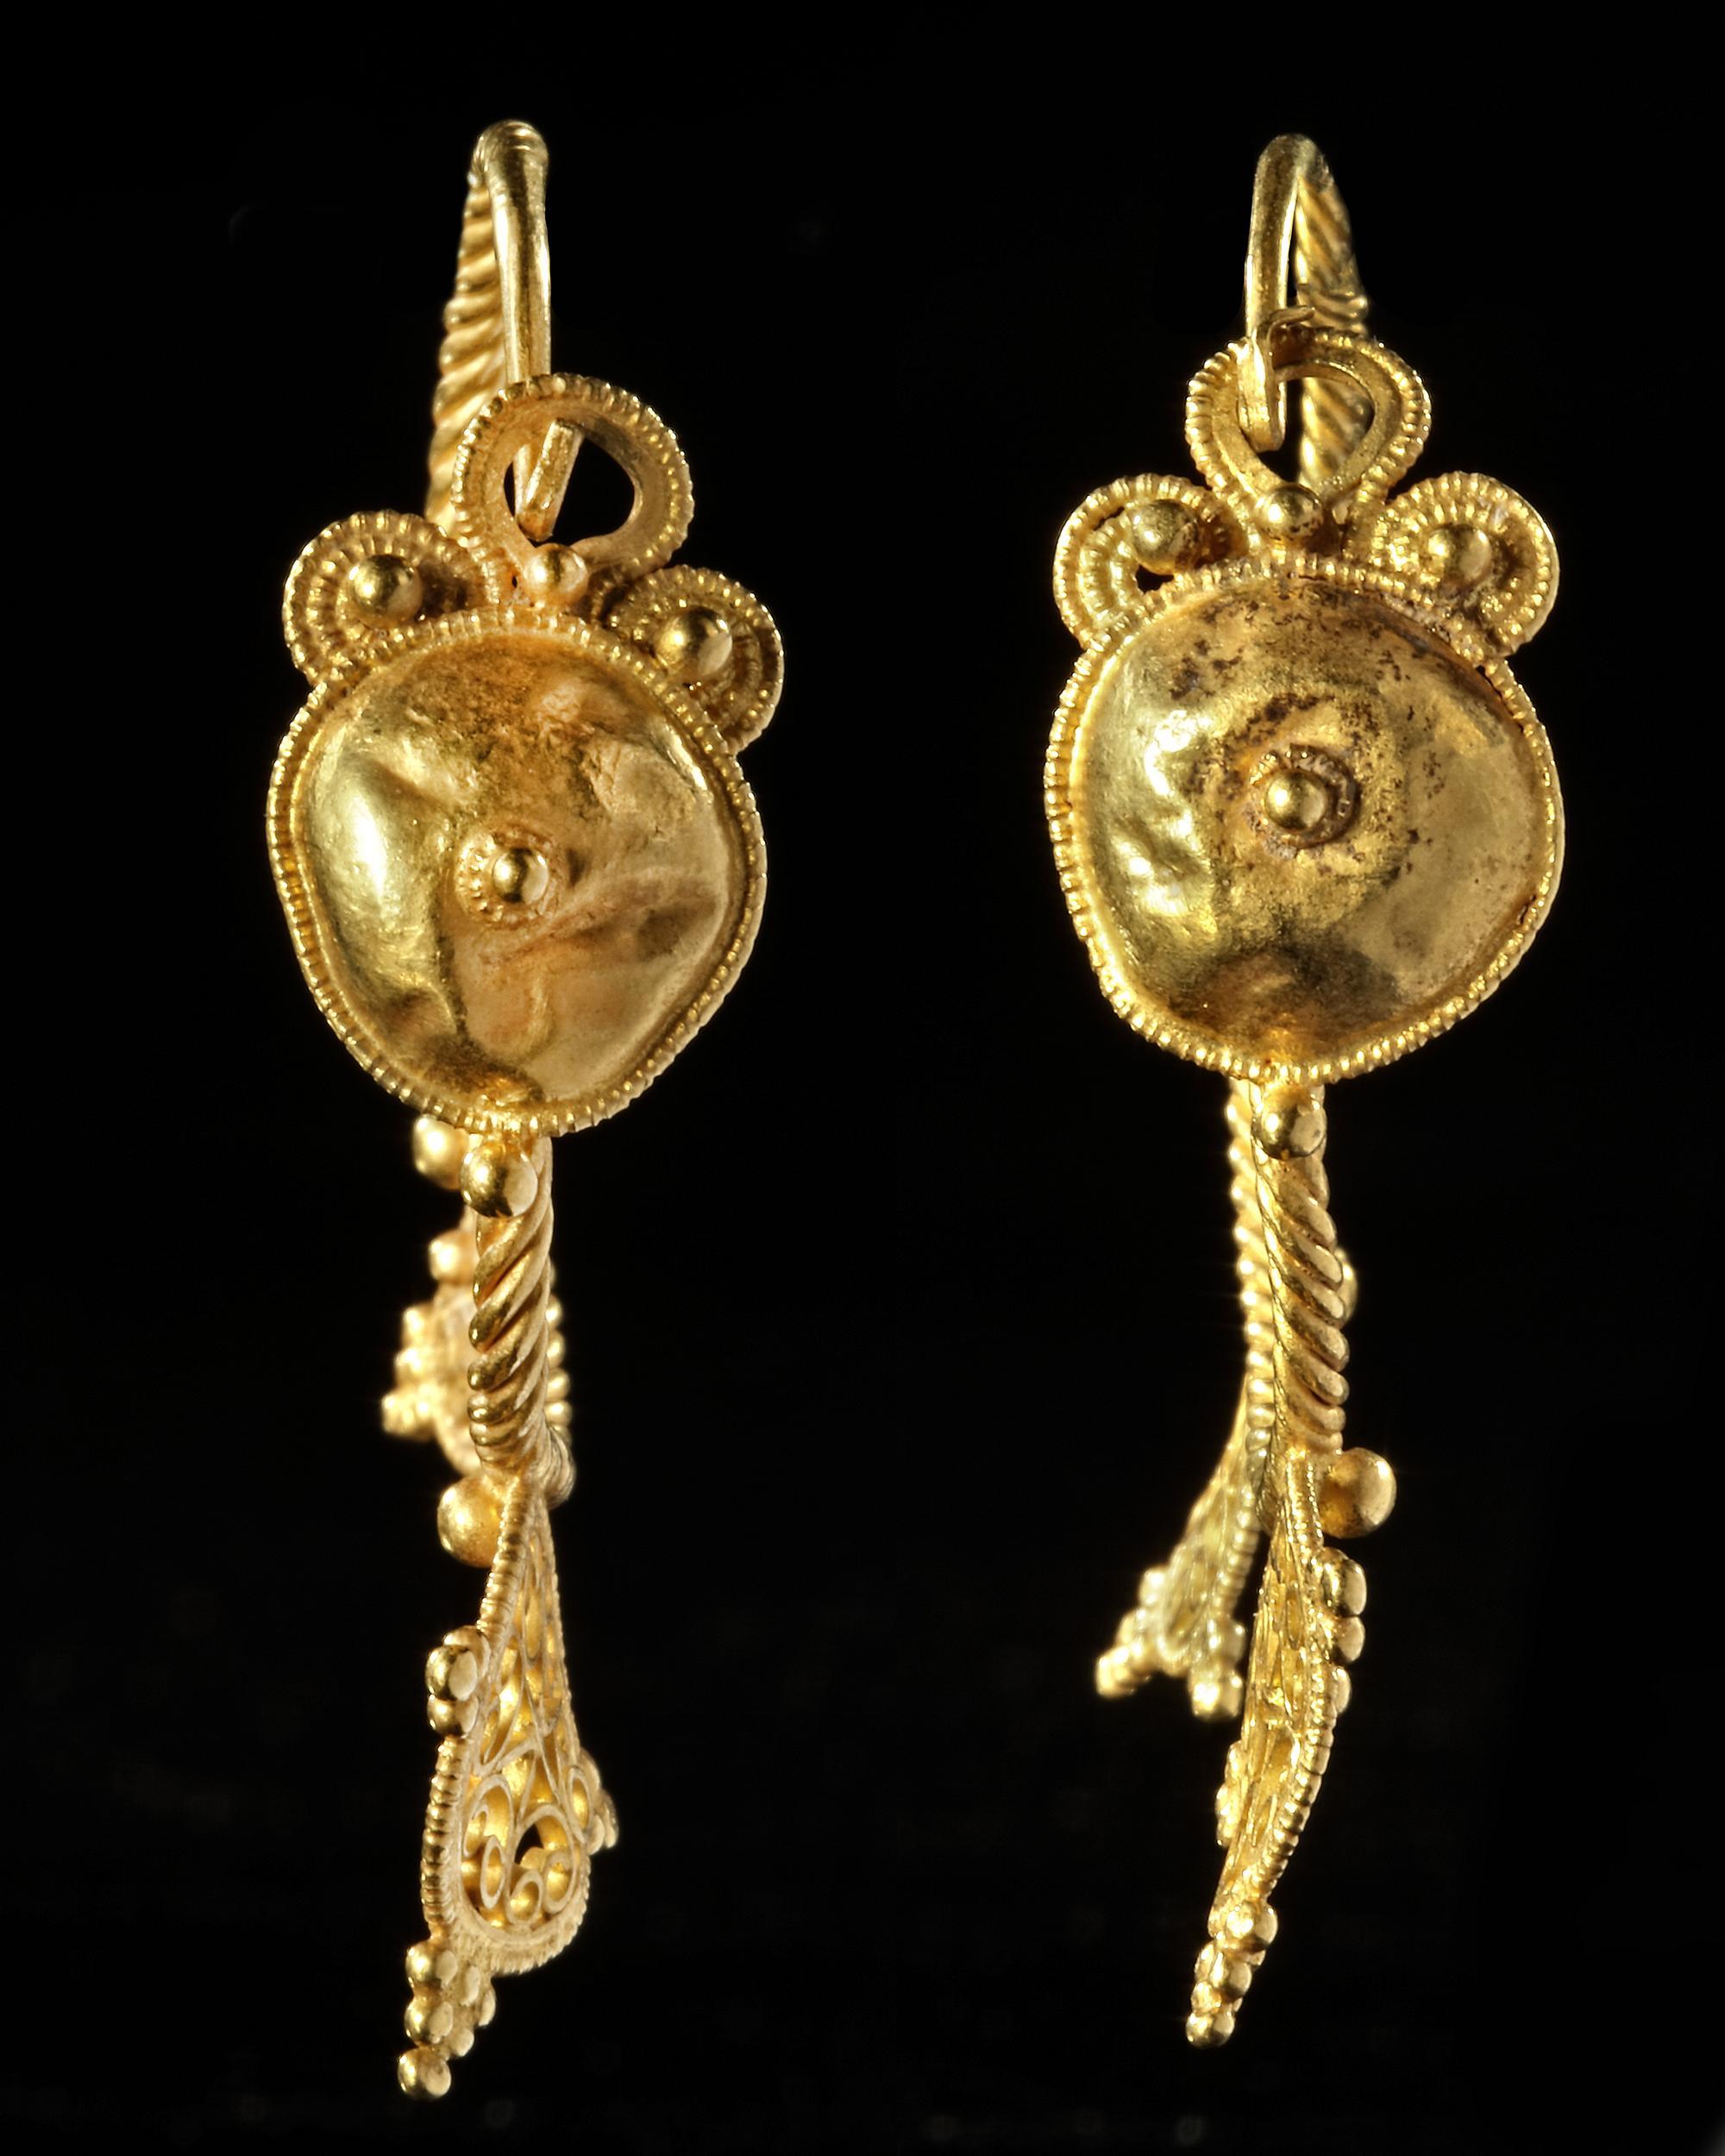 A PAIR OF BYZANTINE GOLD EARRINGS, CIRCA 6TH-7TH CENTURY A.D - Image 3 of 4